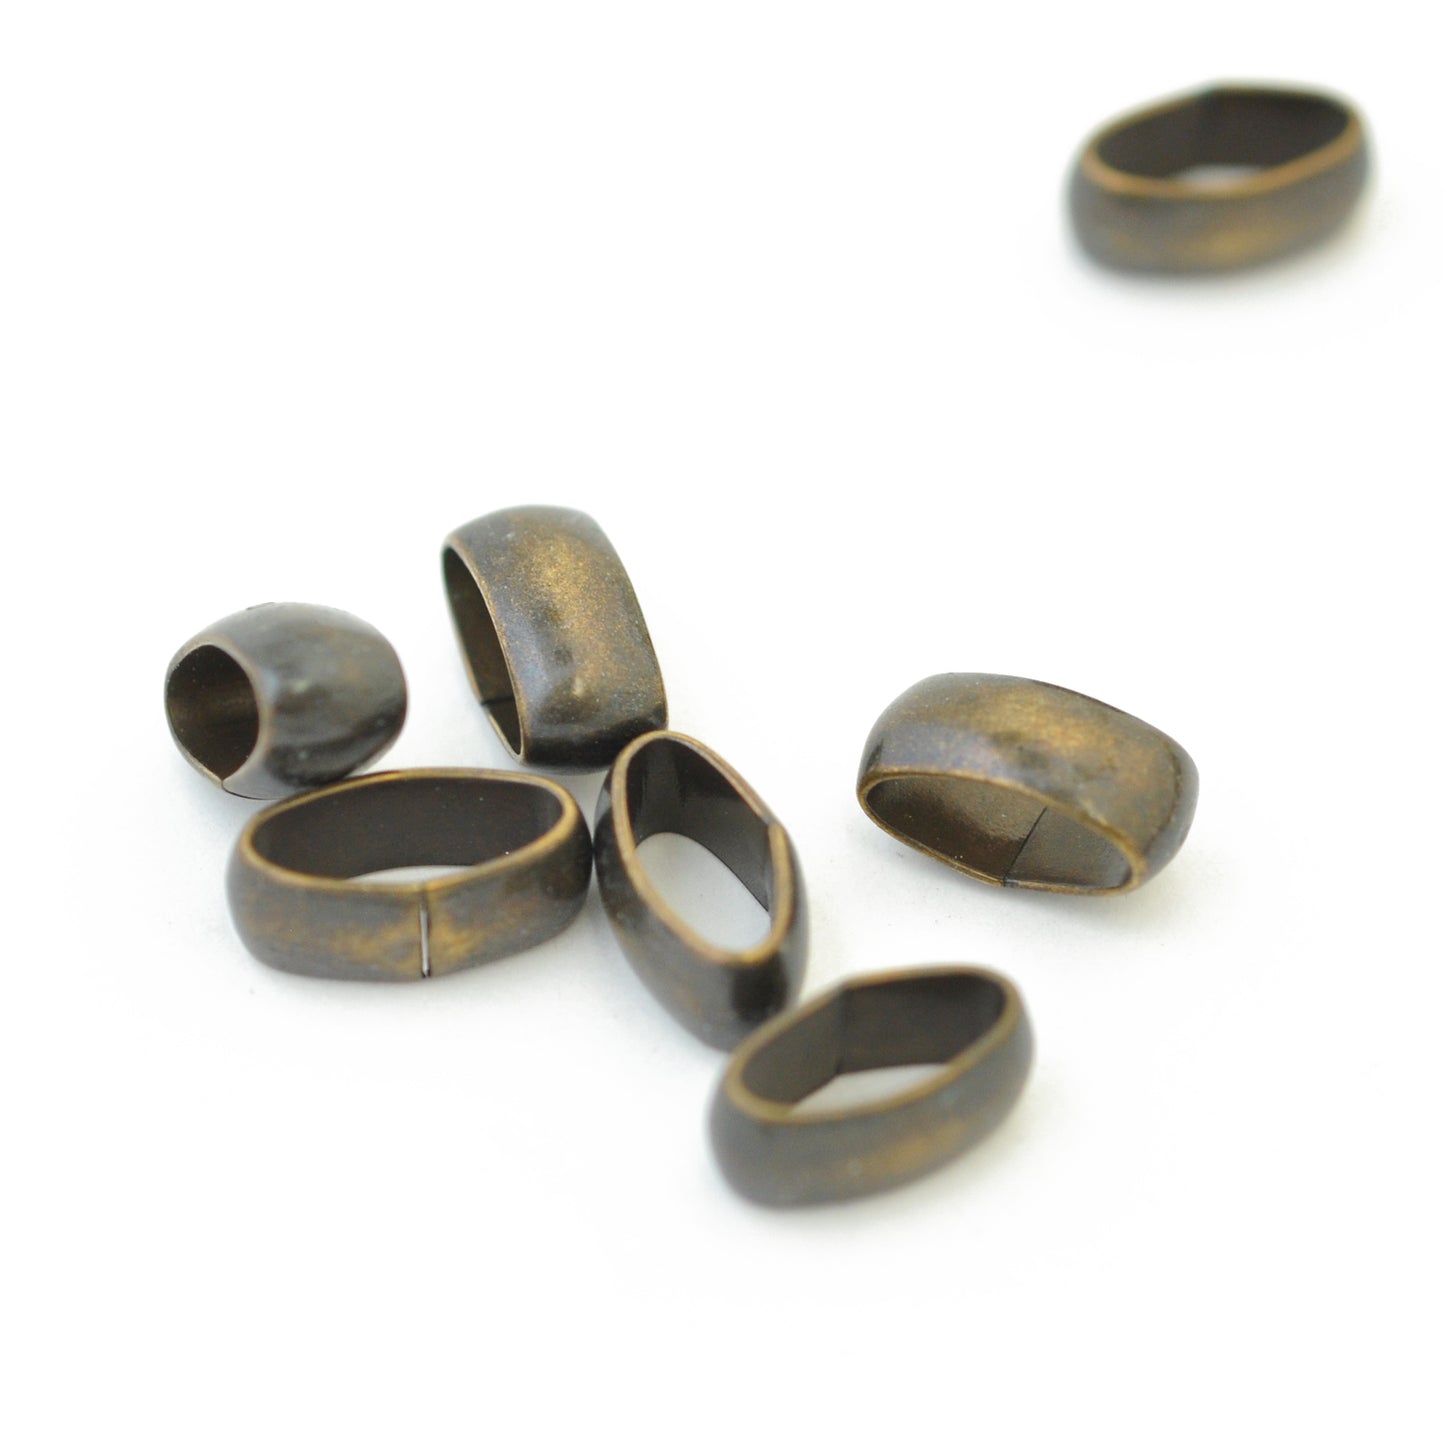 Oval metal spacer / brass colored / 12 mm